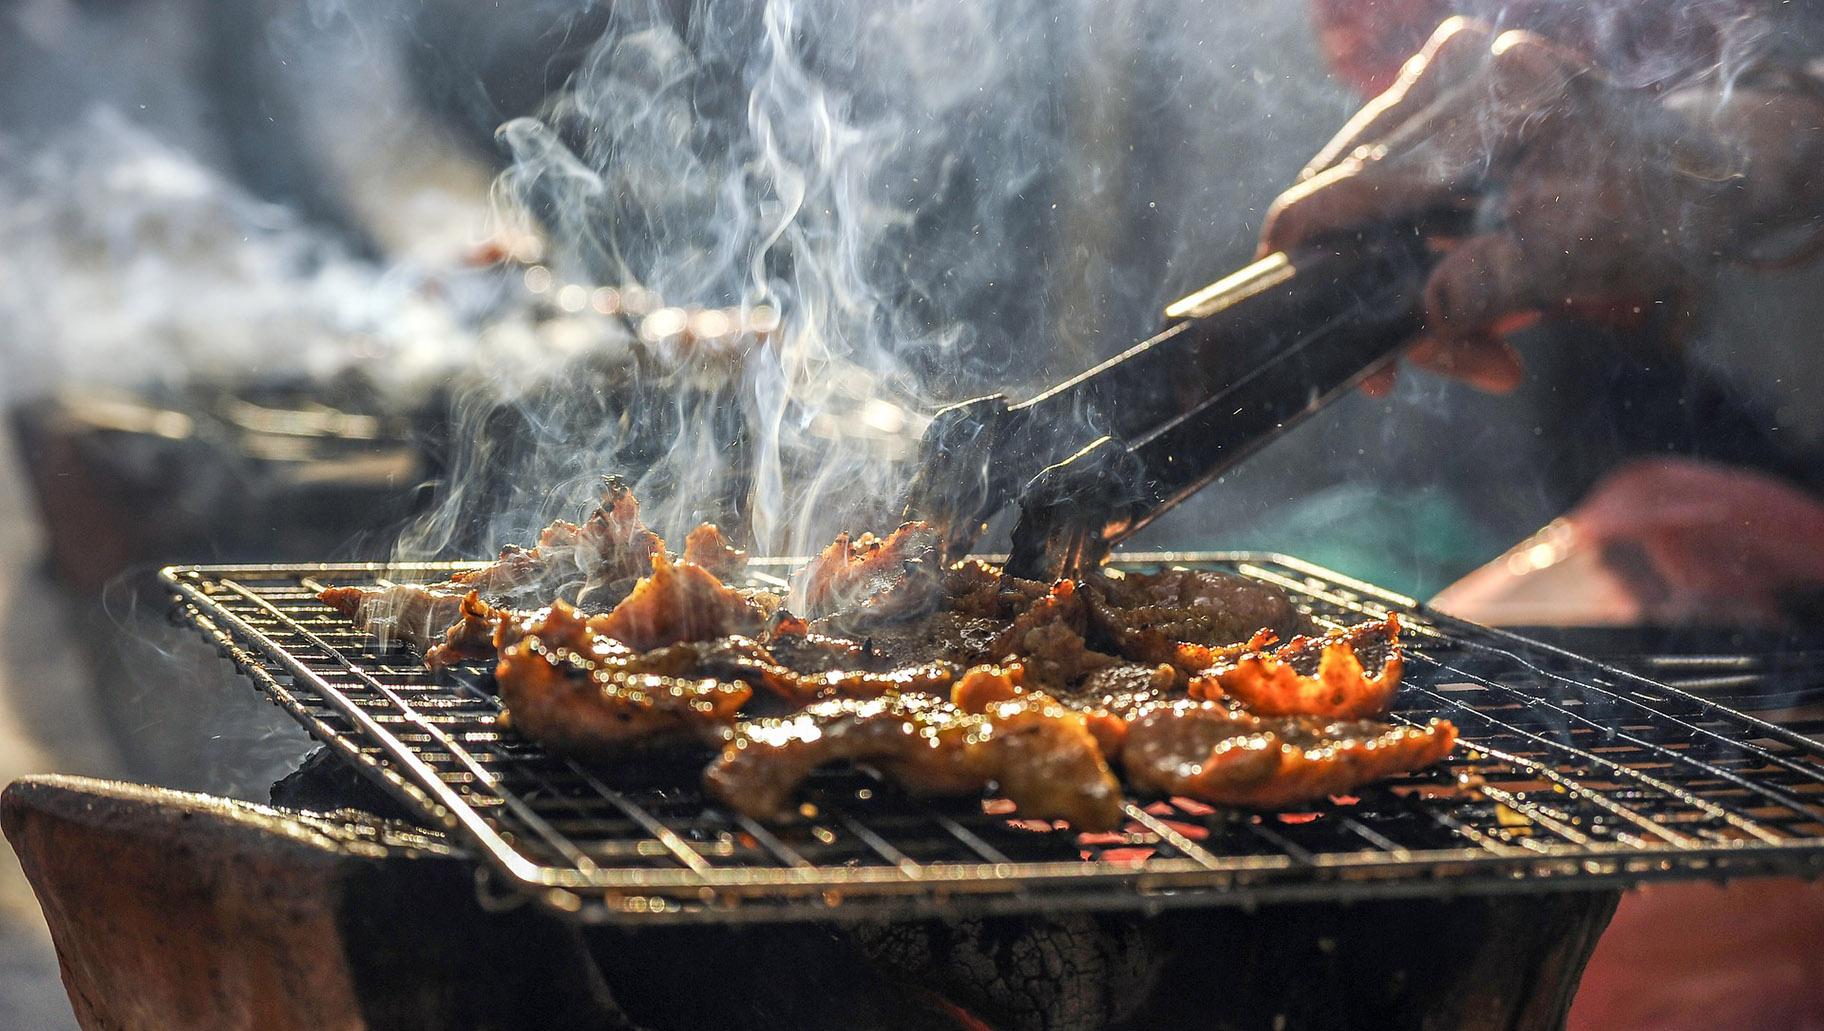 Grilling will be allowed again at Forest Preserves, as of July 9. (Pixabay)